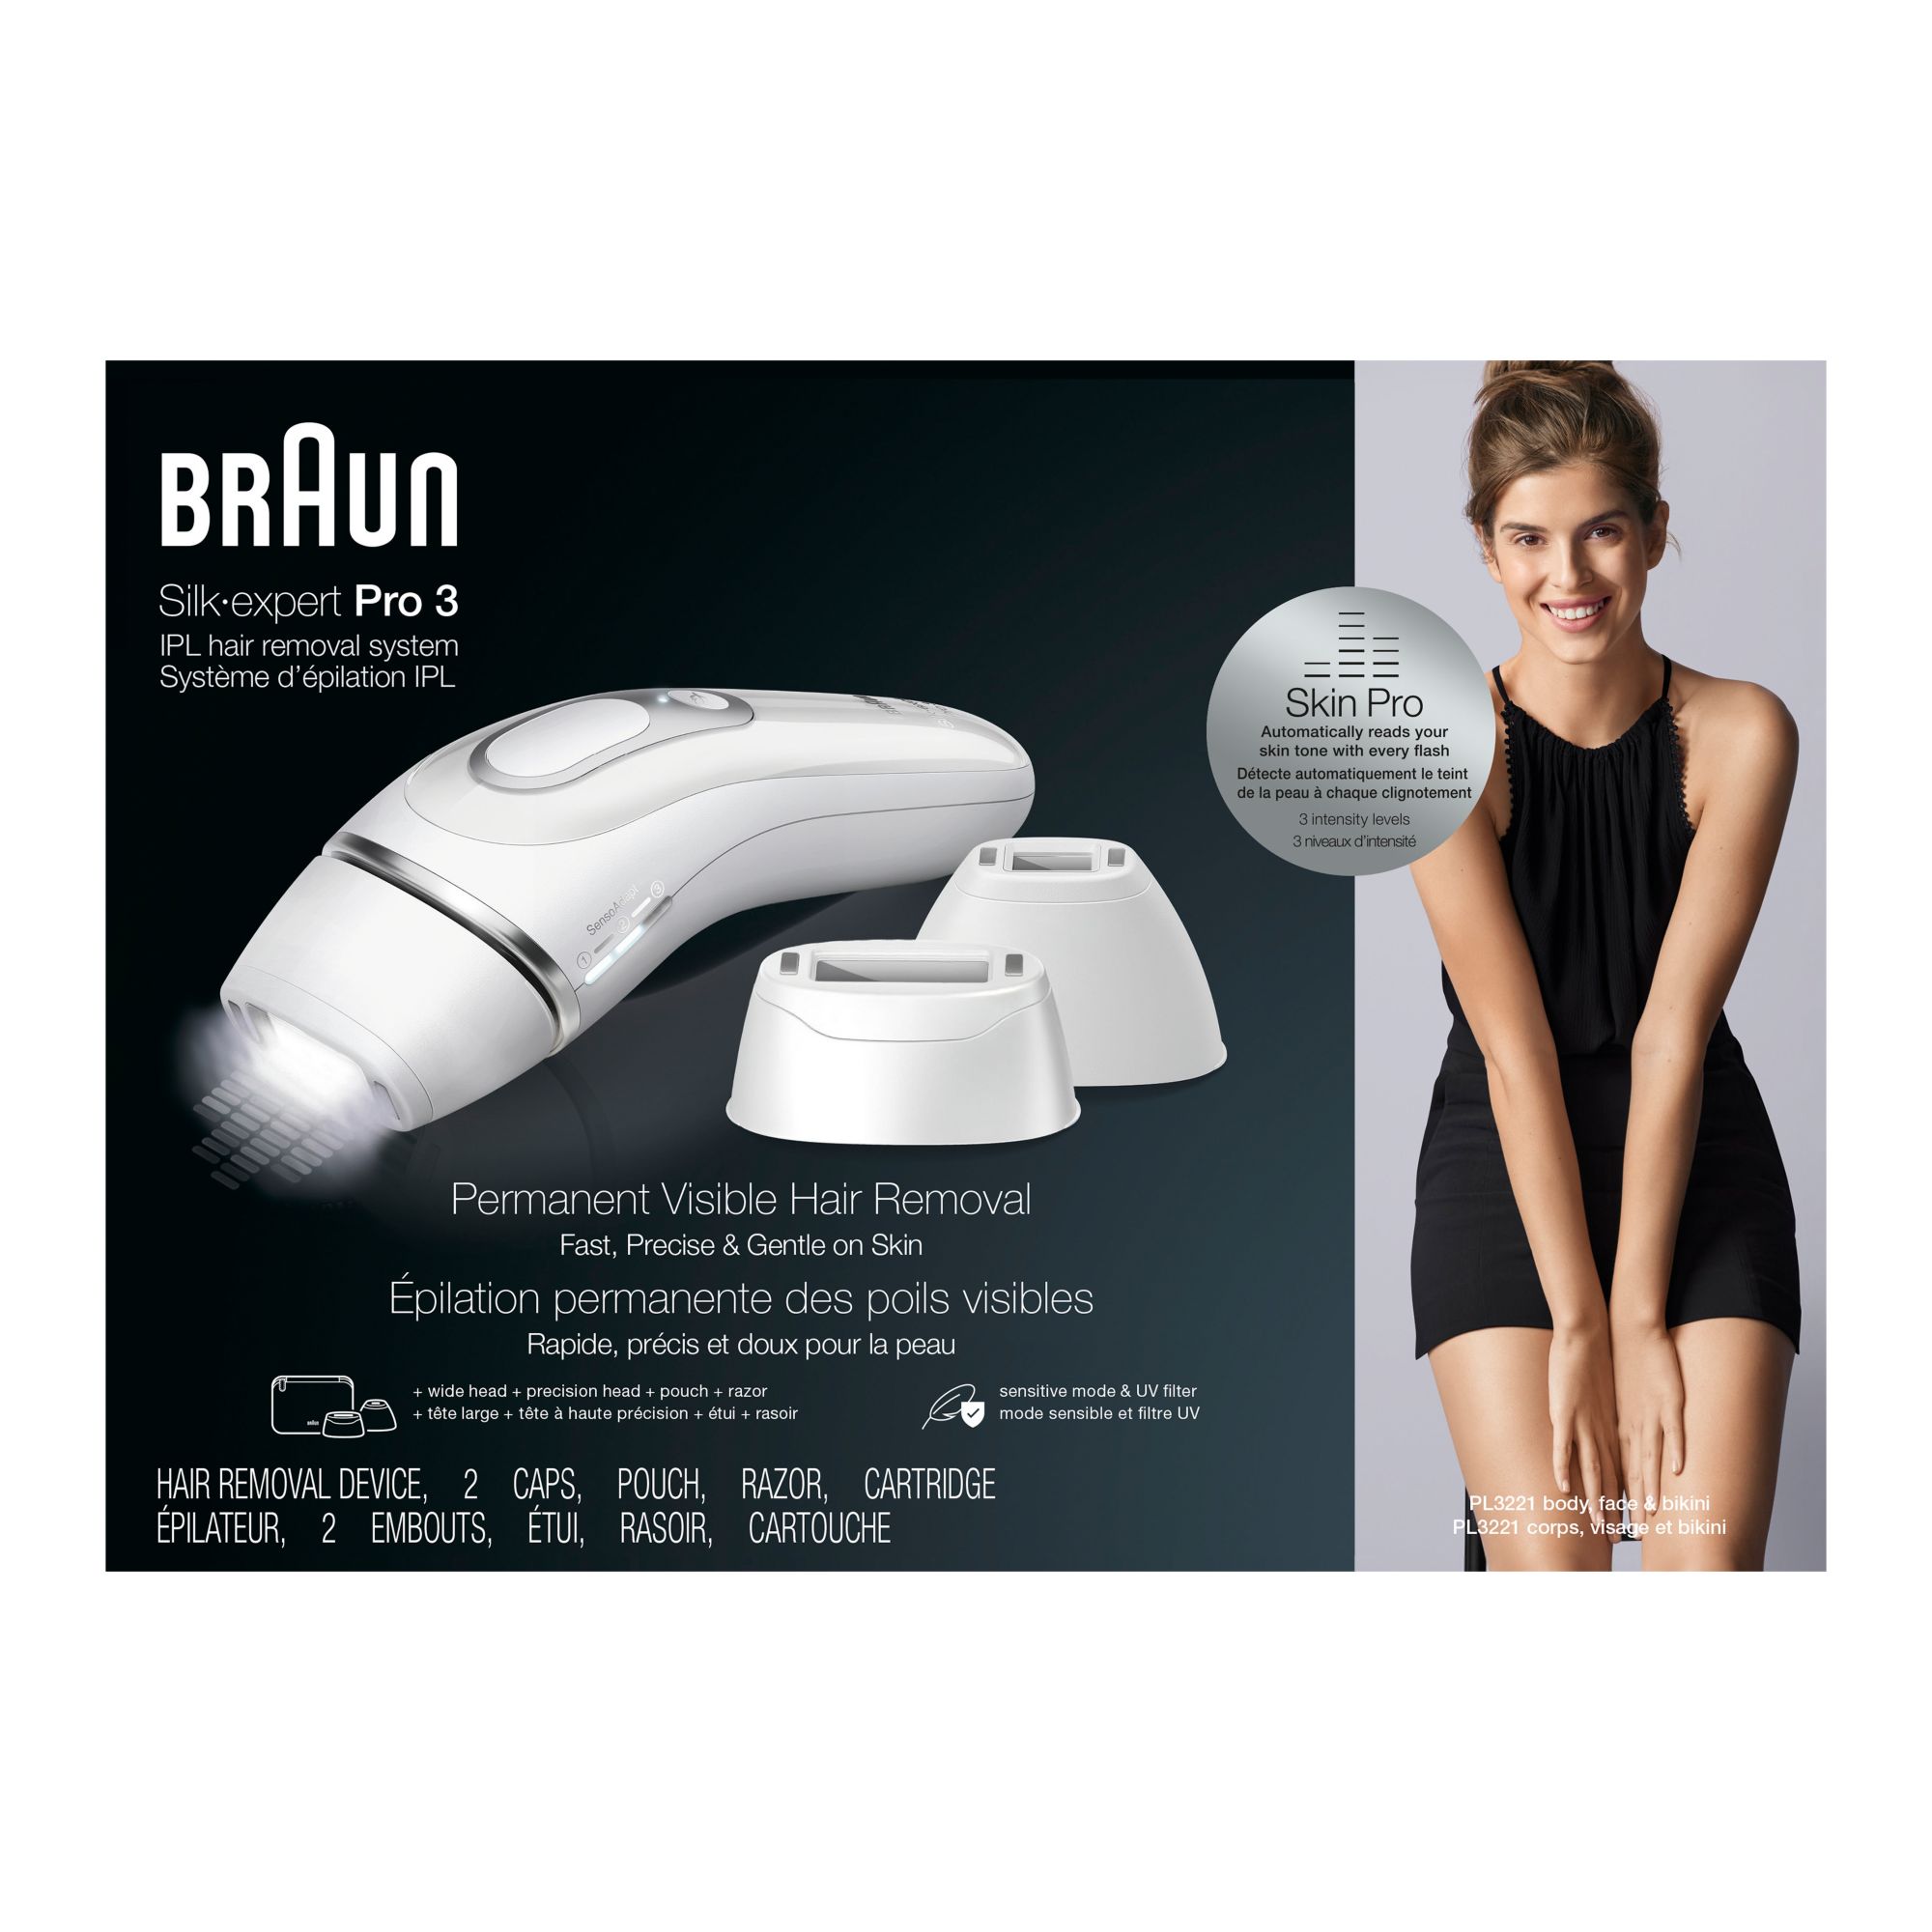 Braun Silk Expert Pro 3 IPL At-Home Hair Removal System for Men